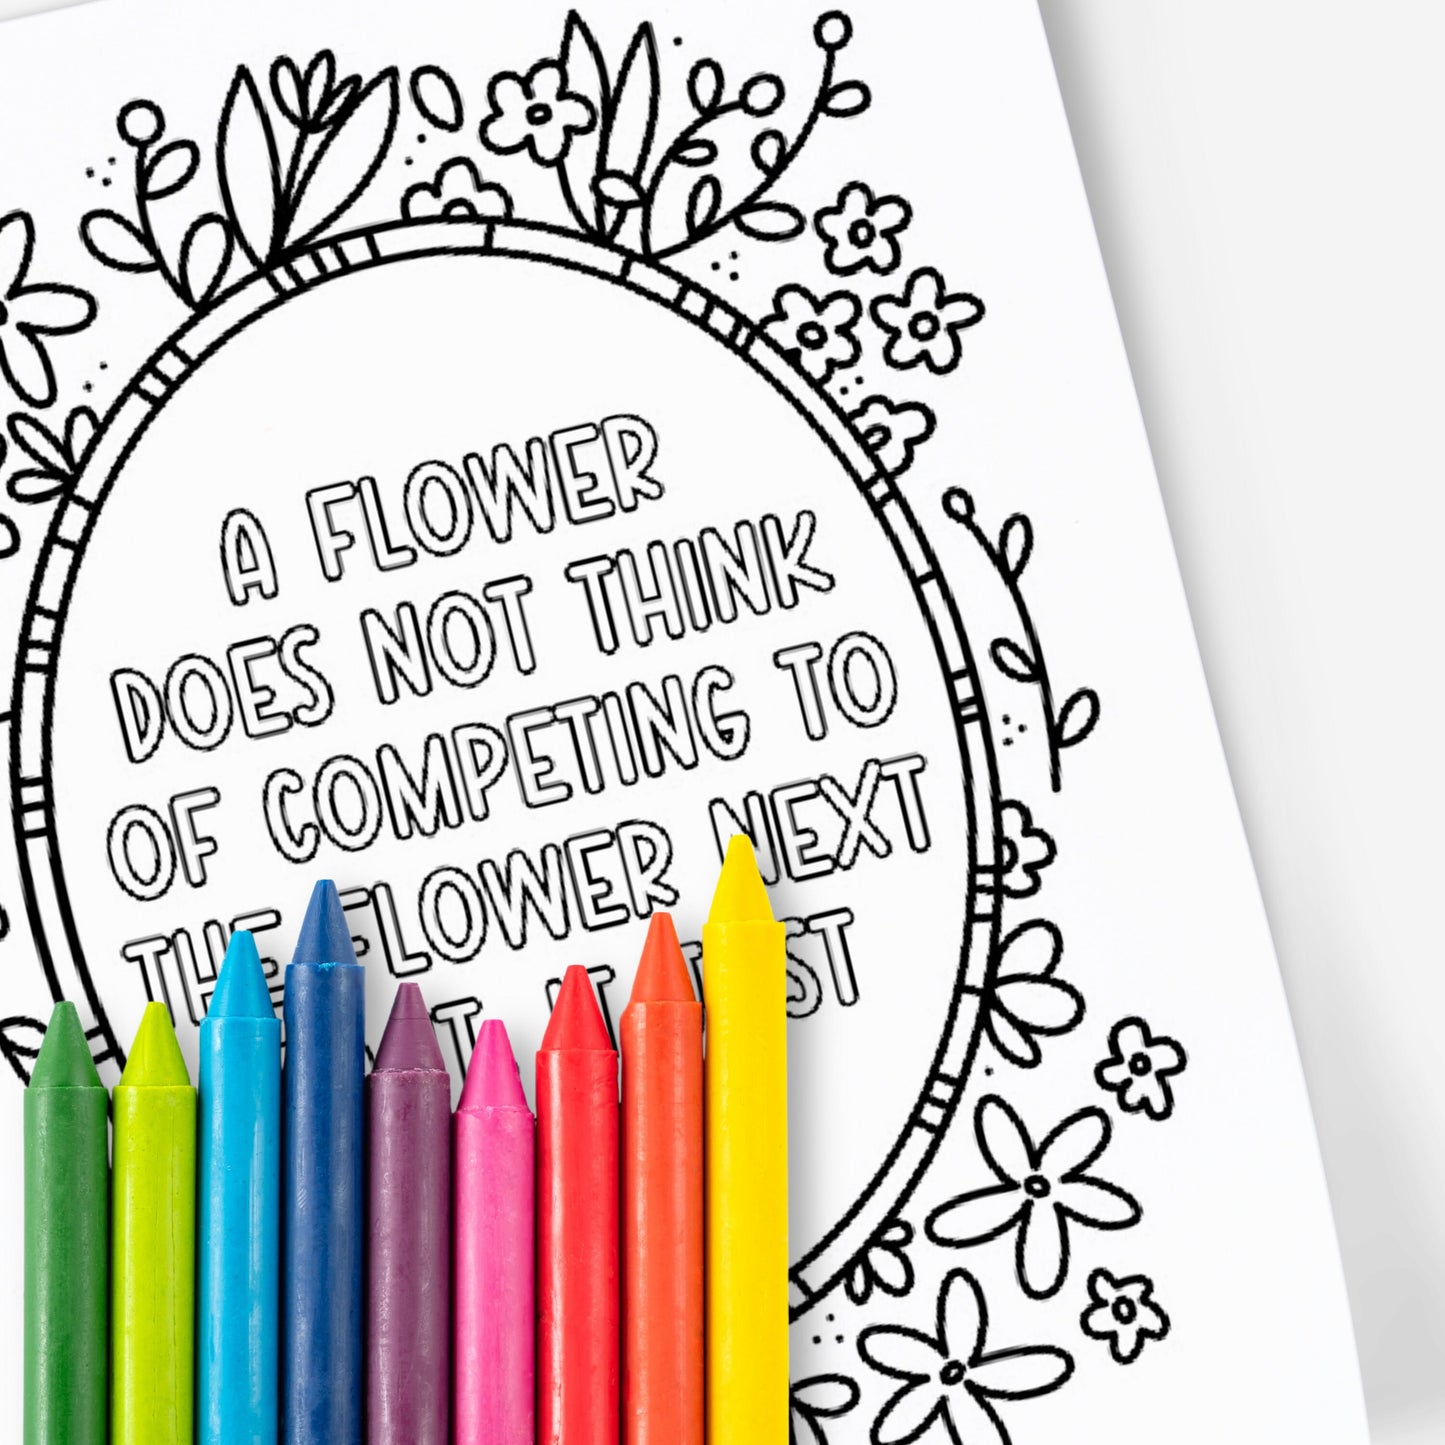 10 Pk Floral Printable Coloring Book 10Pk Coloring Pages | Hand-Drawn Flower Digital Coloring Book | Adult Zen Calming Color Activity Time